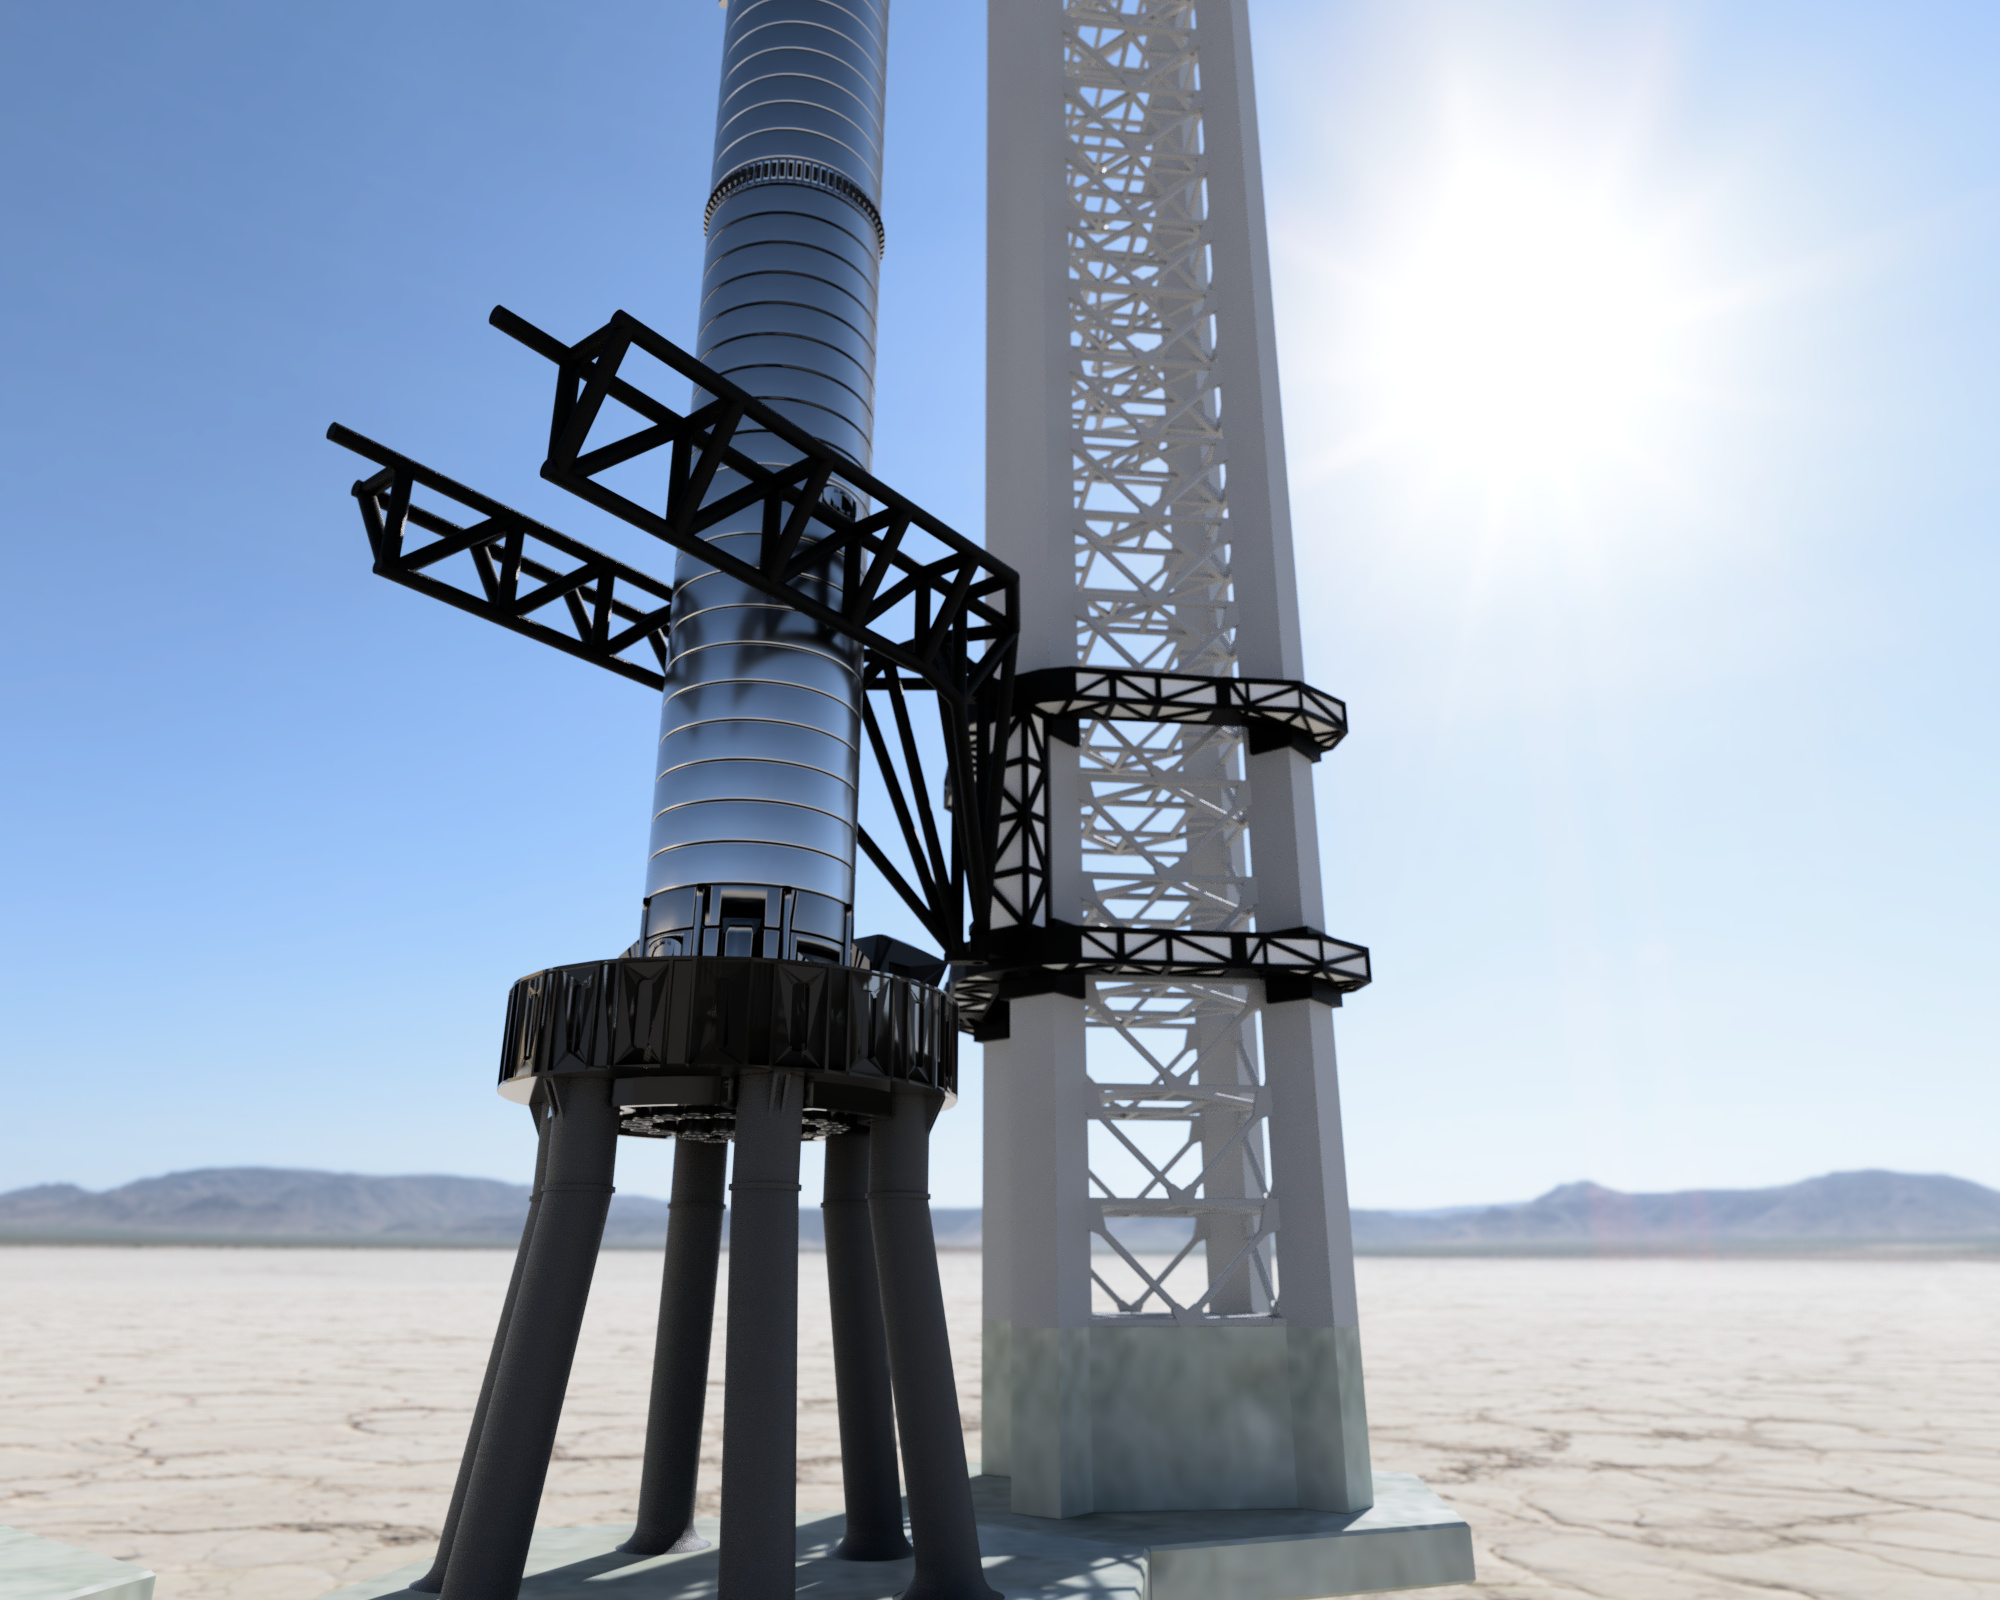 Spacex Starship Orbital Lauch Tower Mechazilla With Gse Tanks By Anubiz3d Download Free Stl